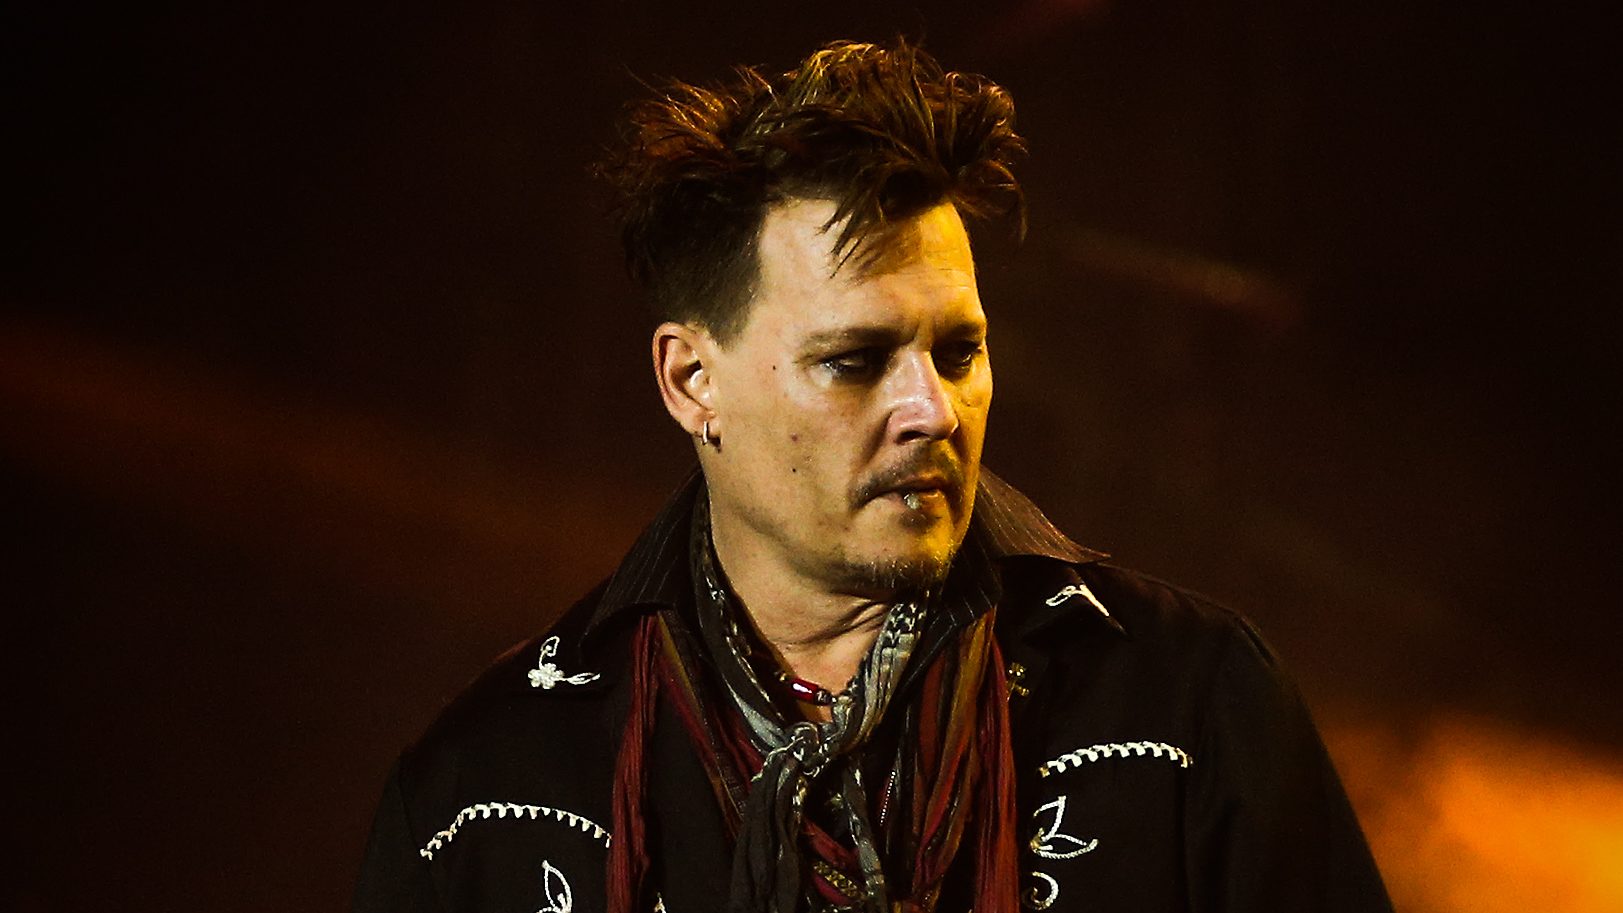 Johnny Depp, facing abuse allegations, gets support from family, friends